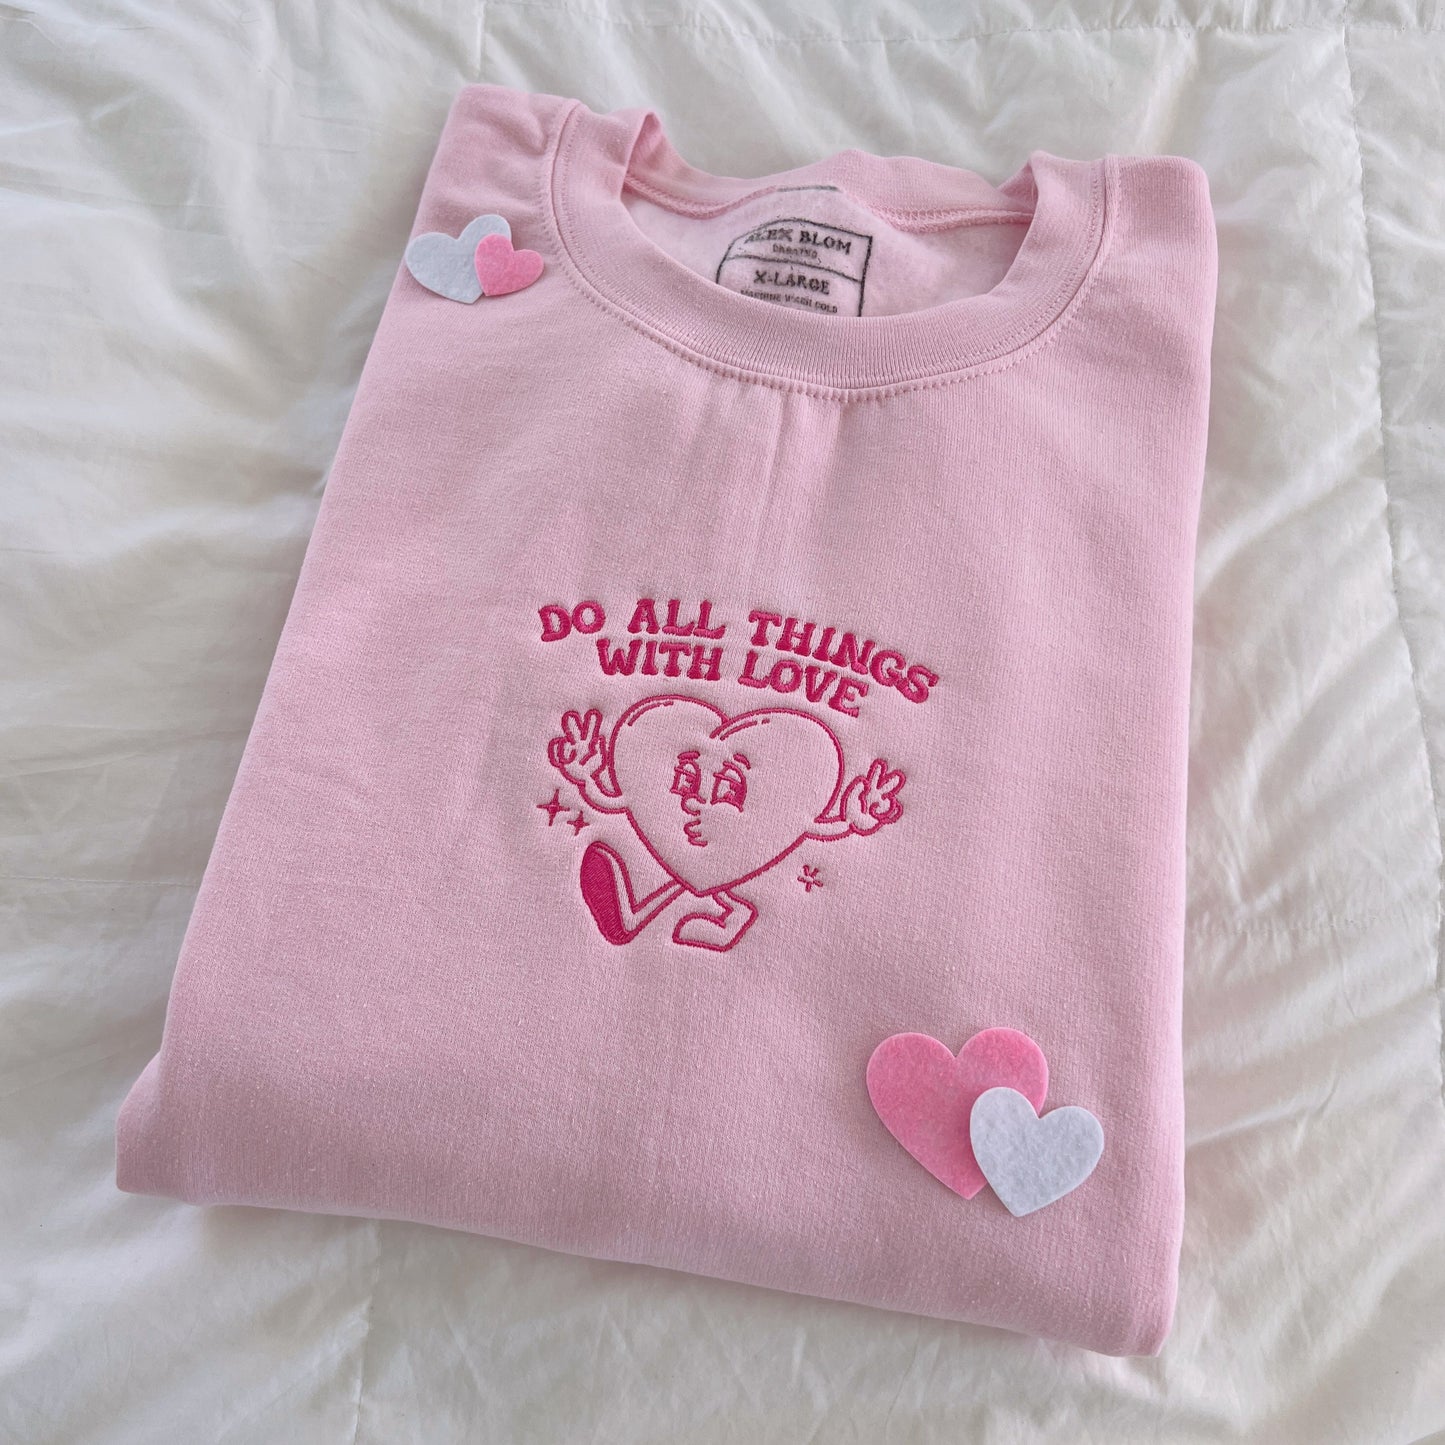 Do All Things With Love Embroidered Crewneck